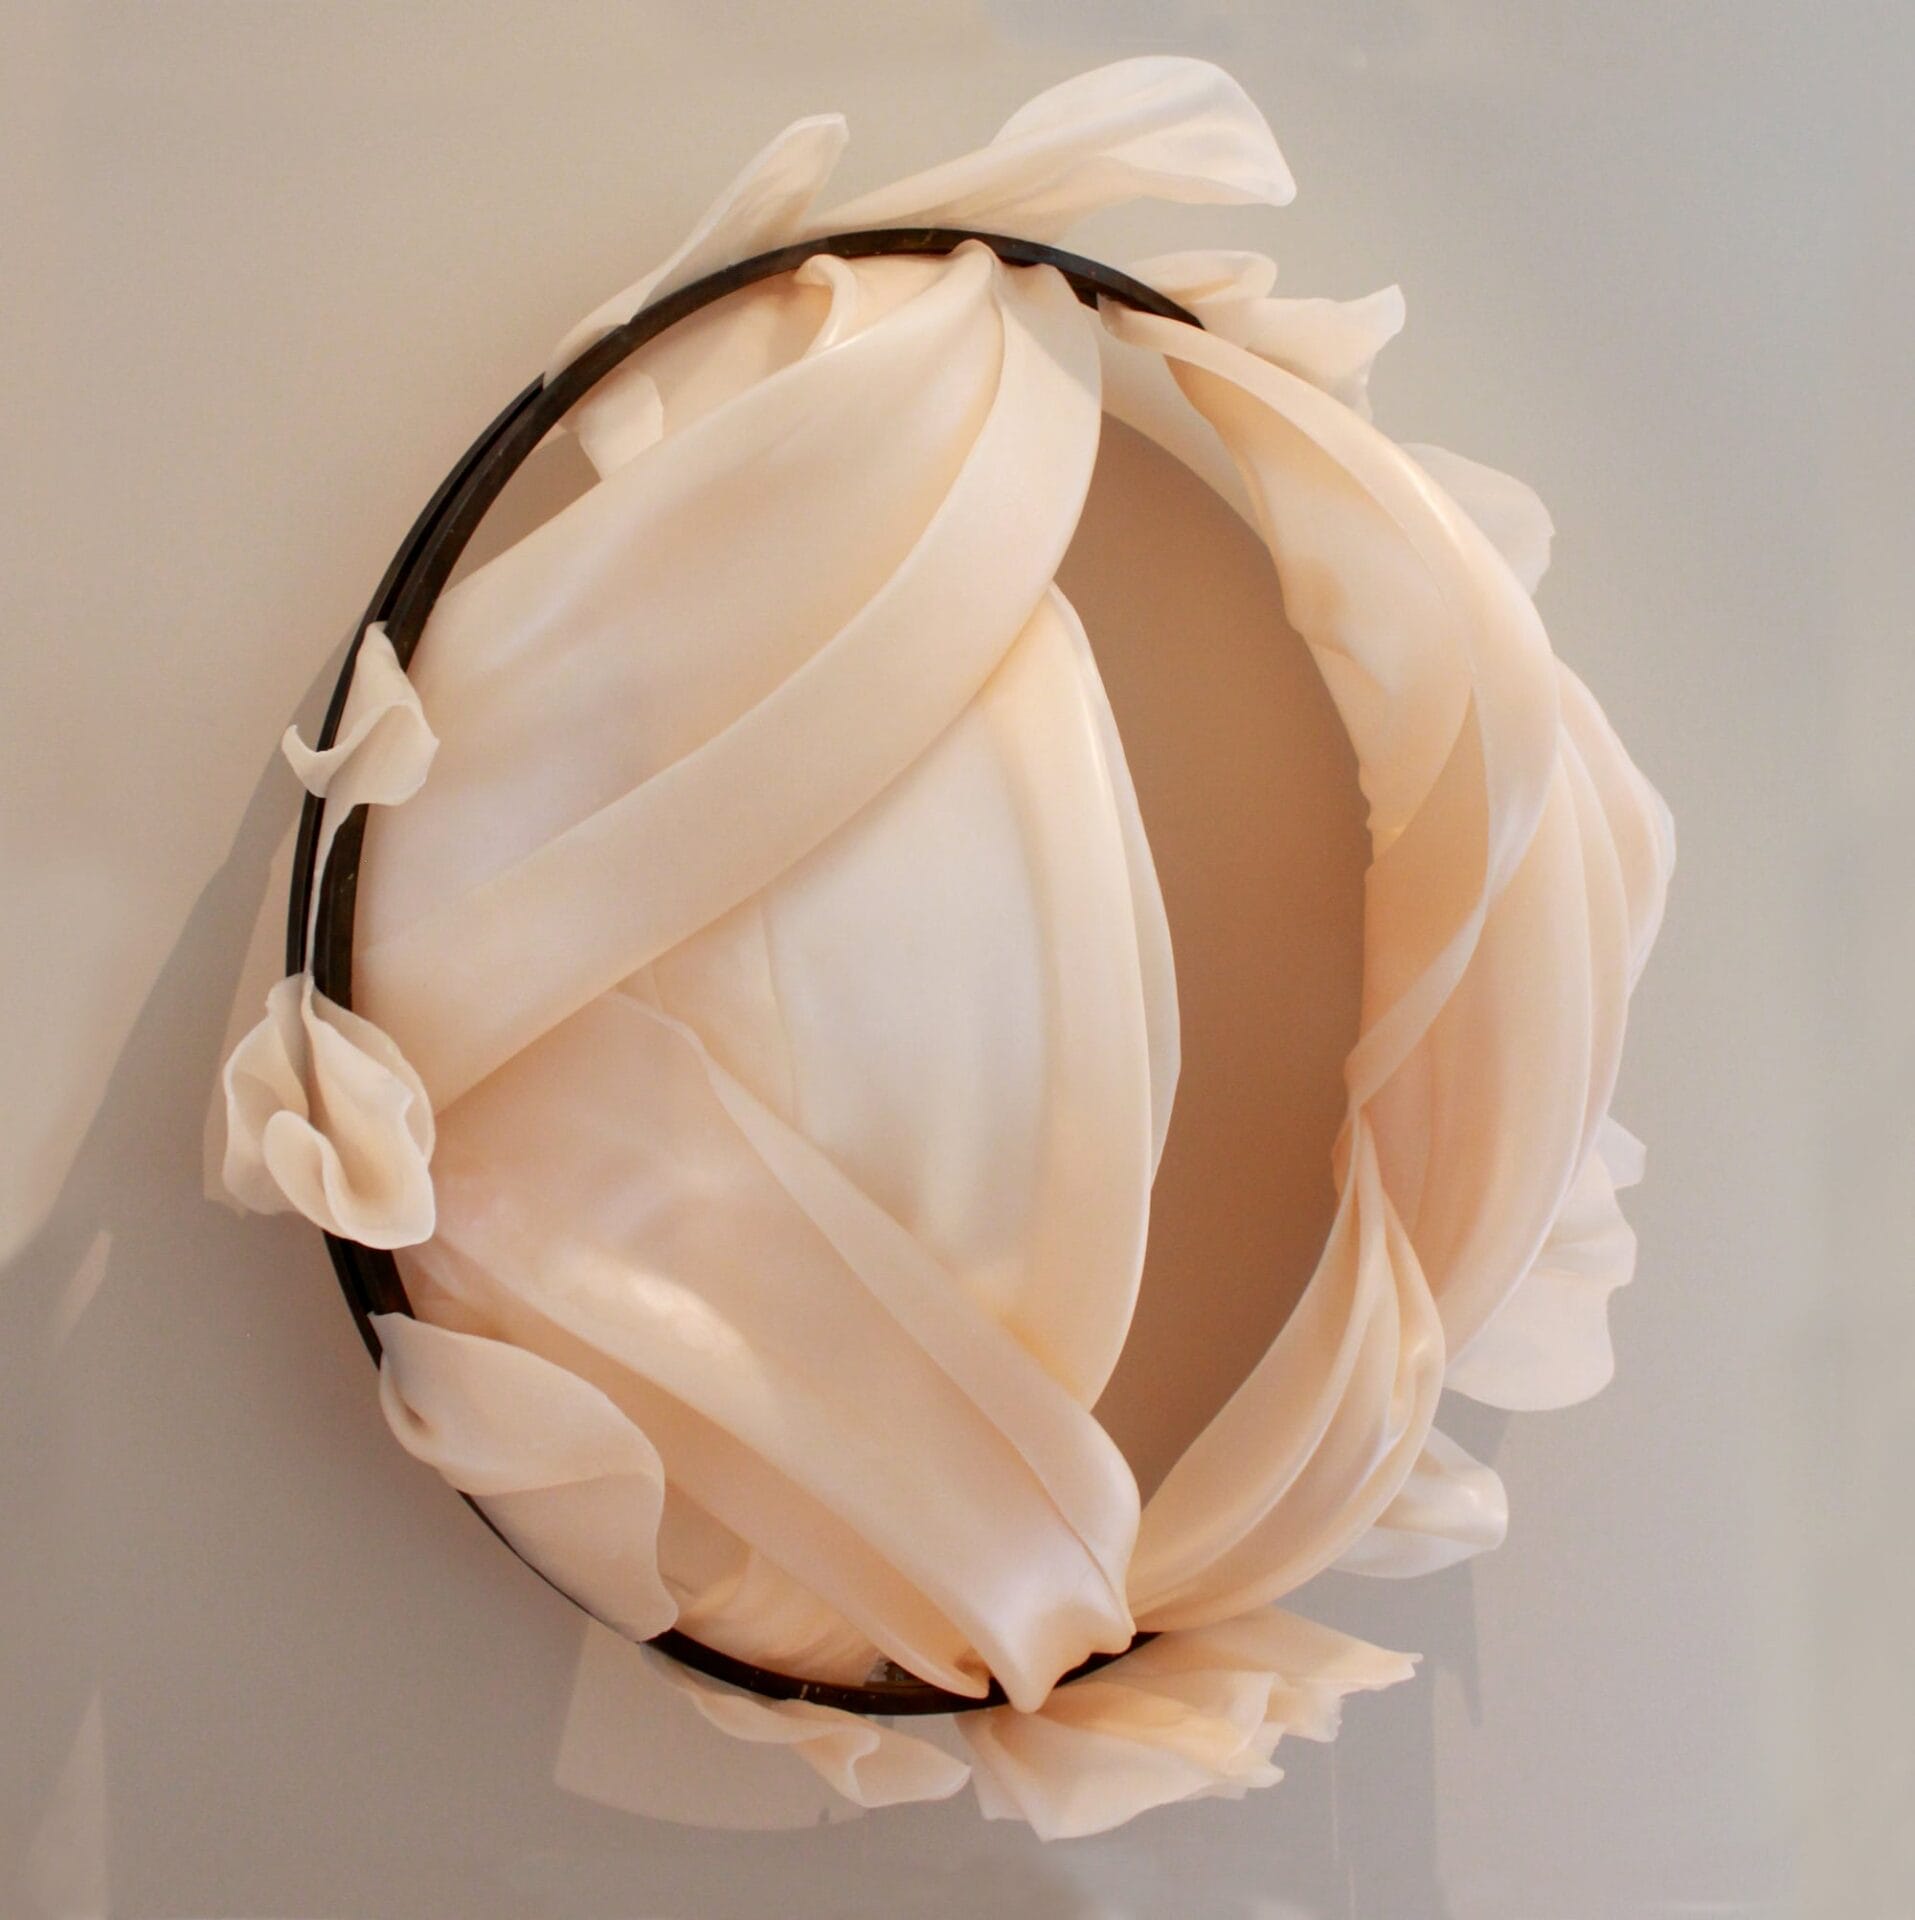 a circular wall sculpture with thin wax sheets billowing out around it